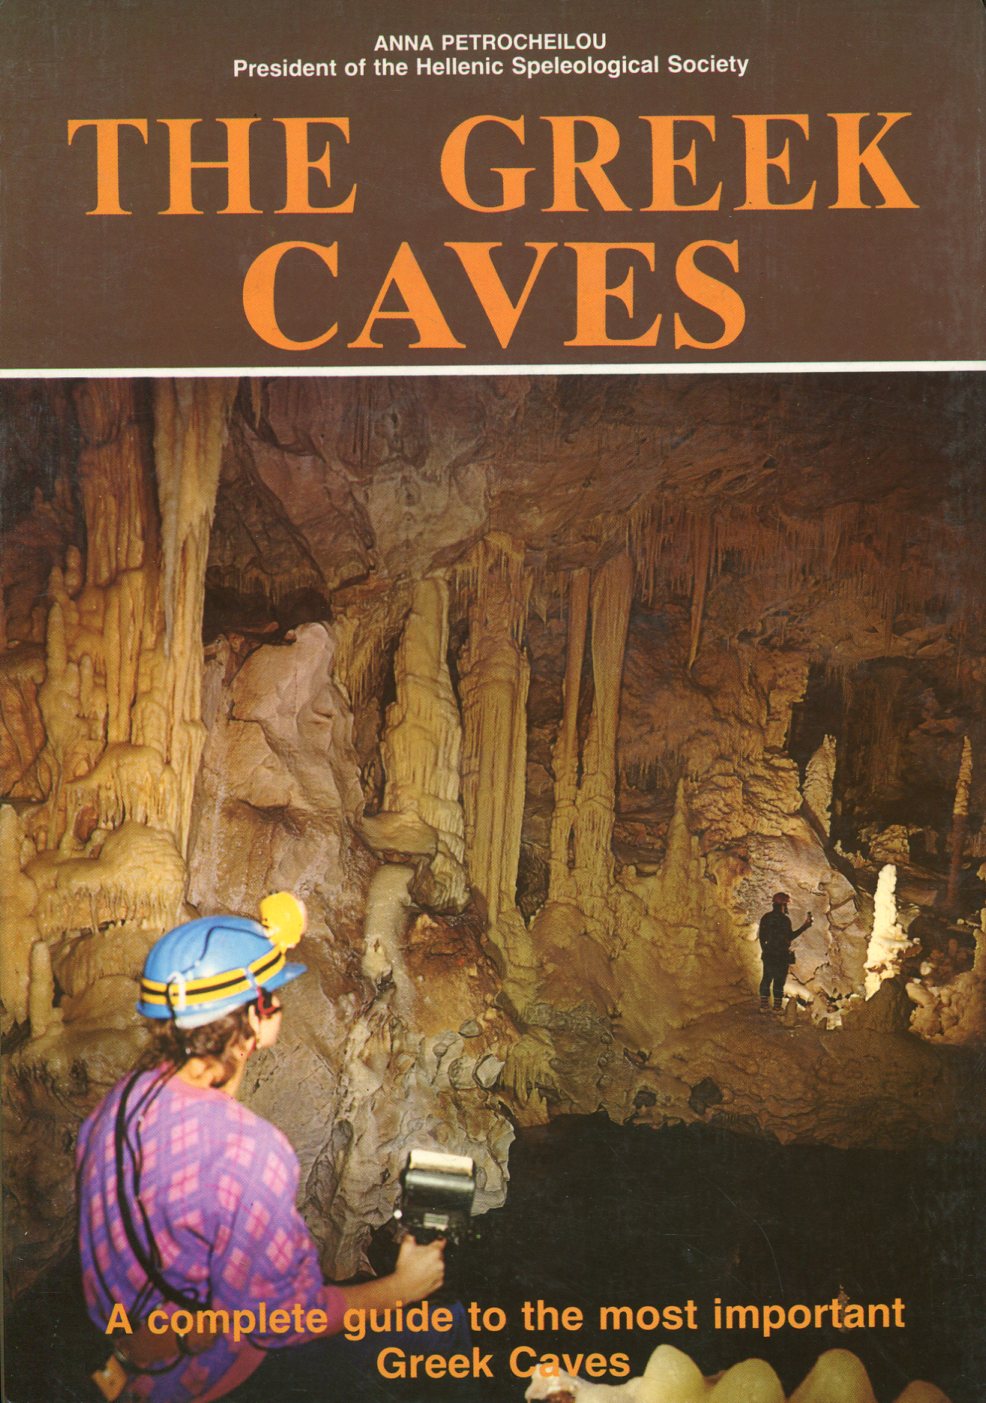 THE GREEK CAVES